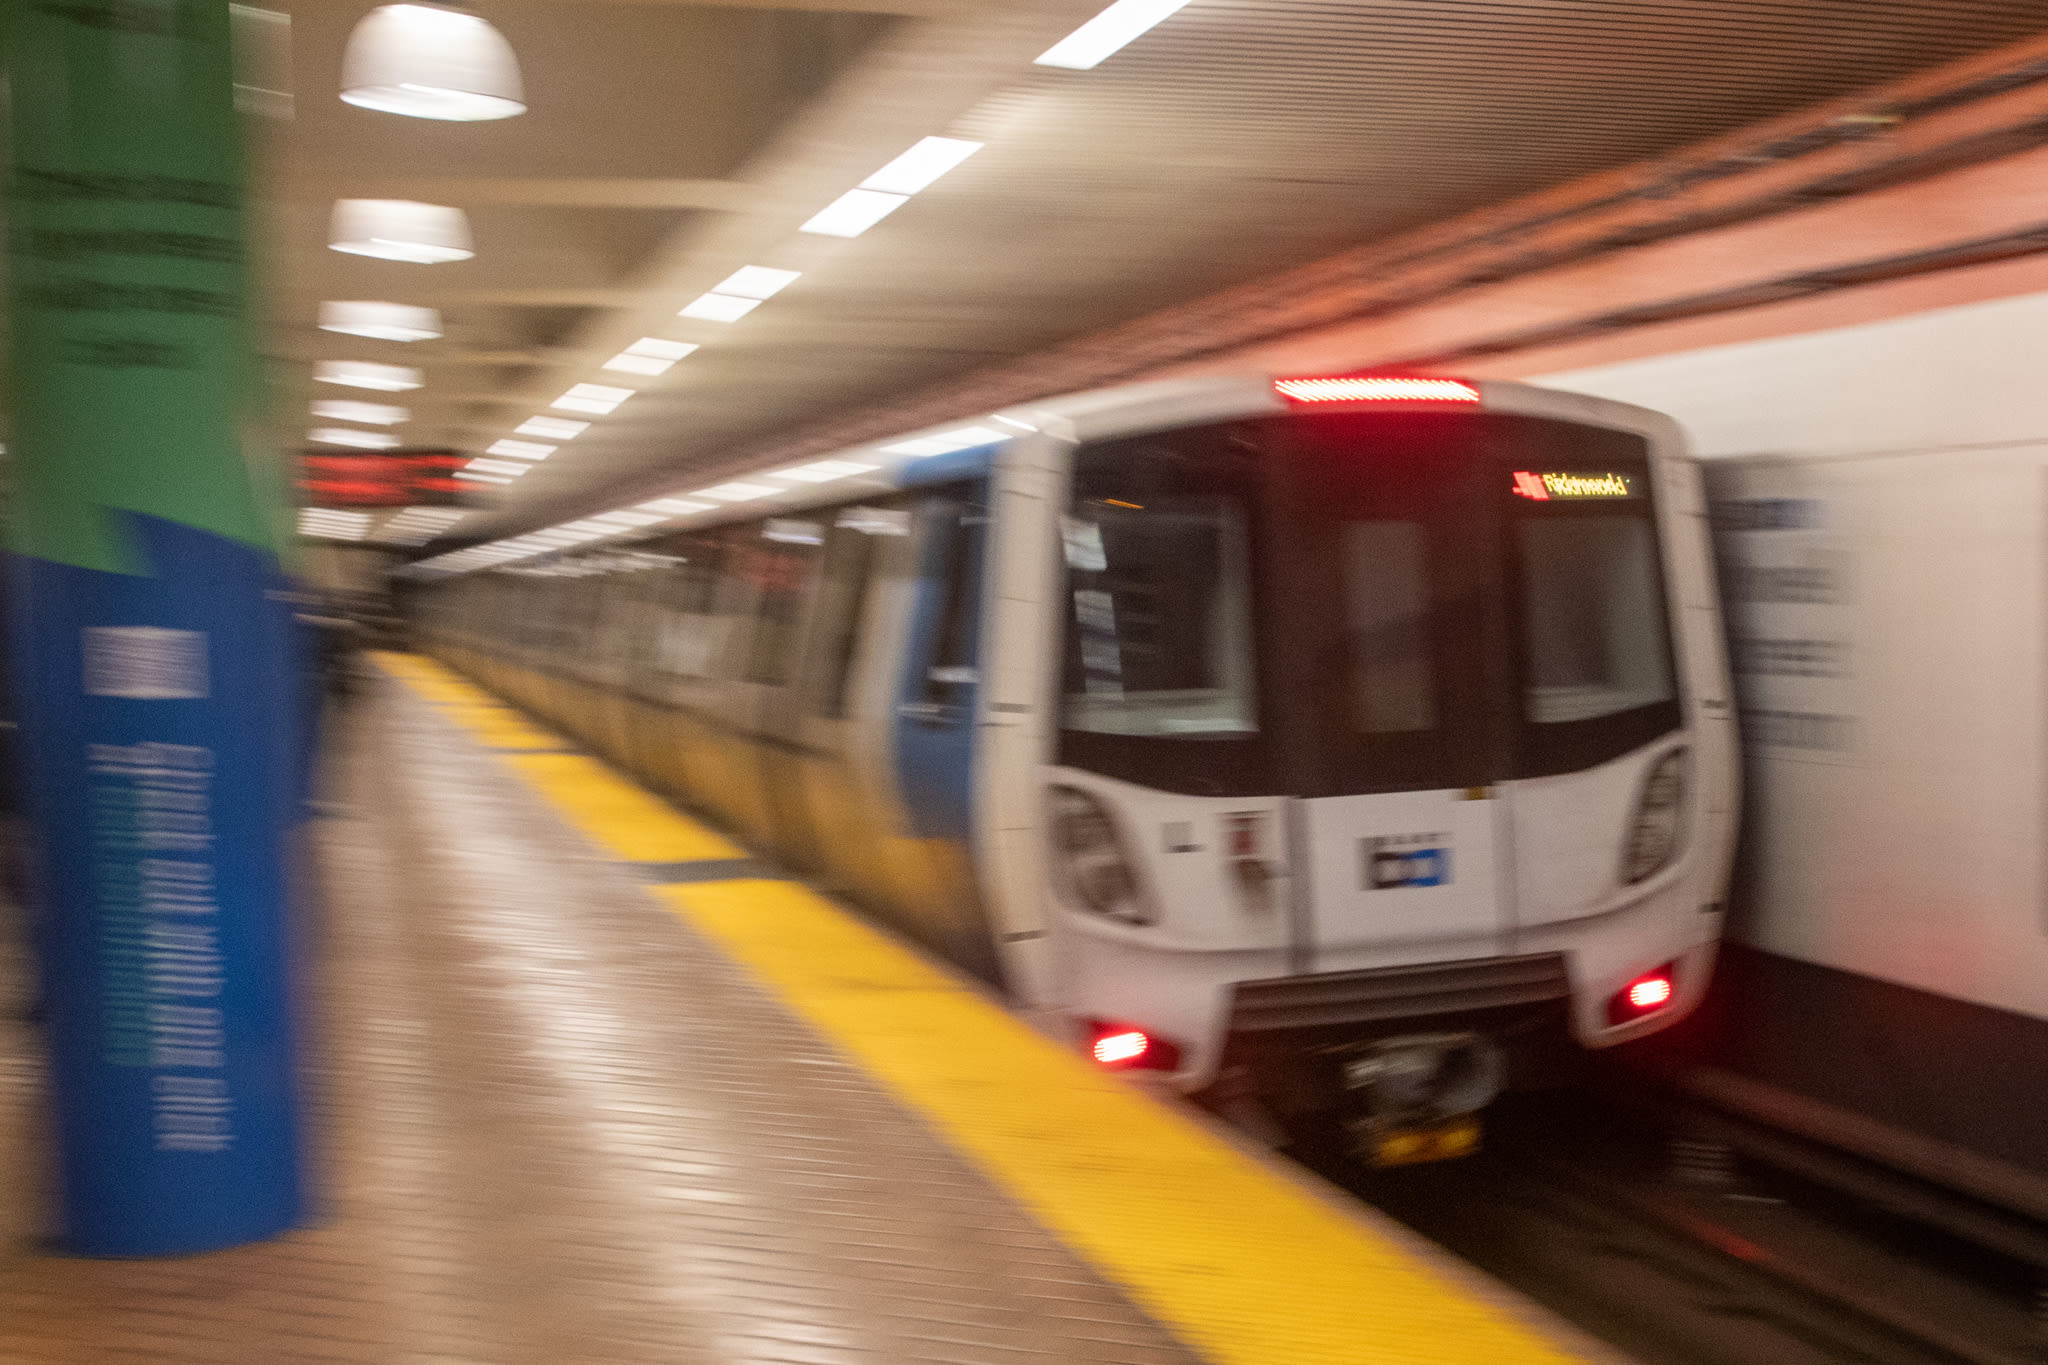 Woman, 74, dies after being pushed as BART train was approaching